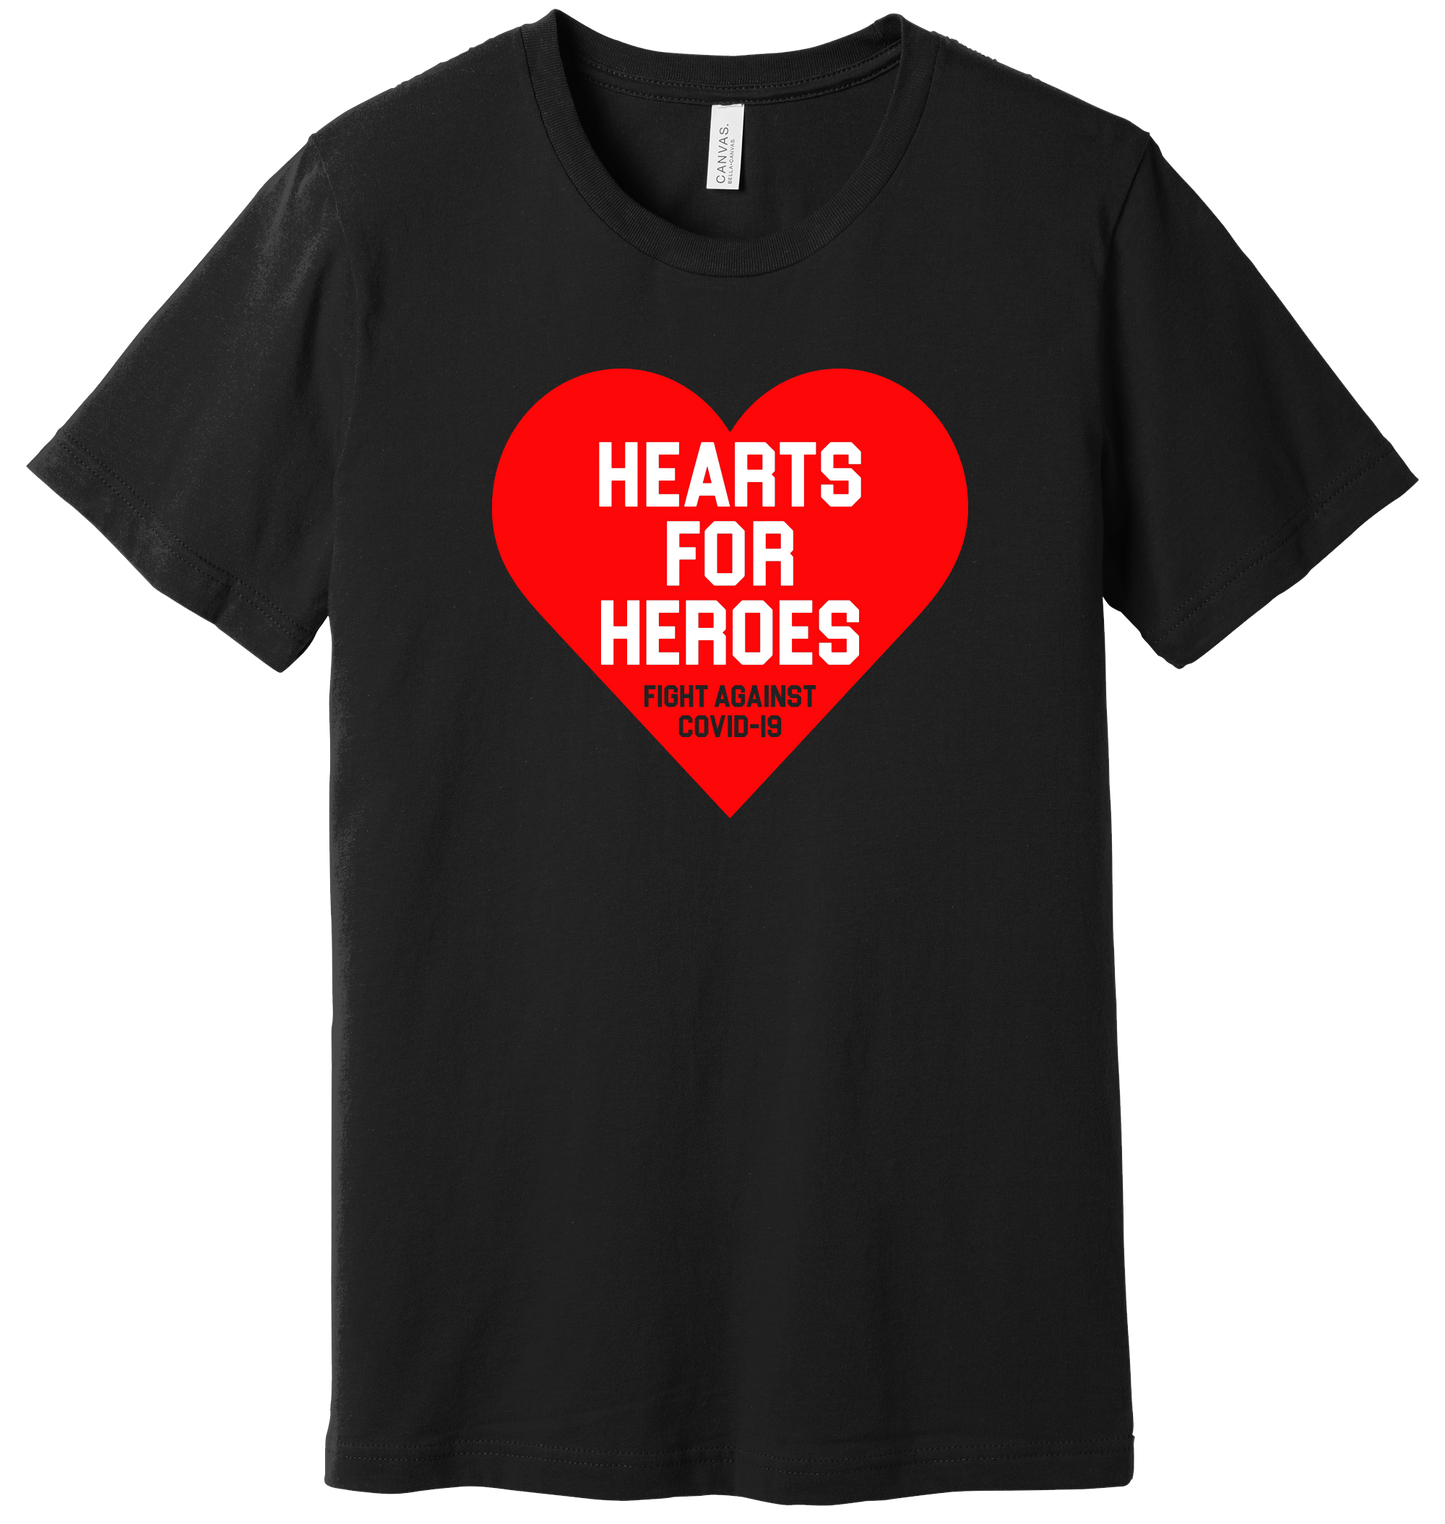 Hearts for Heroes T-shirt